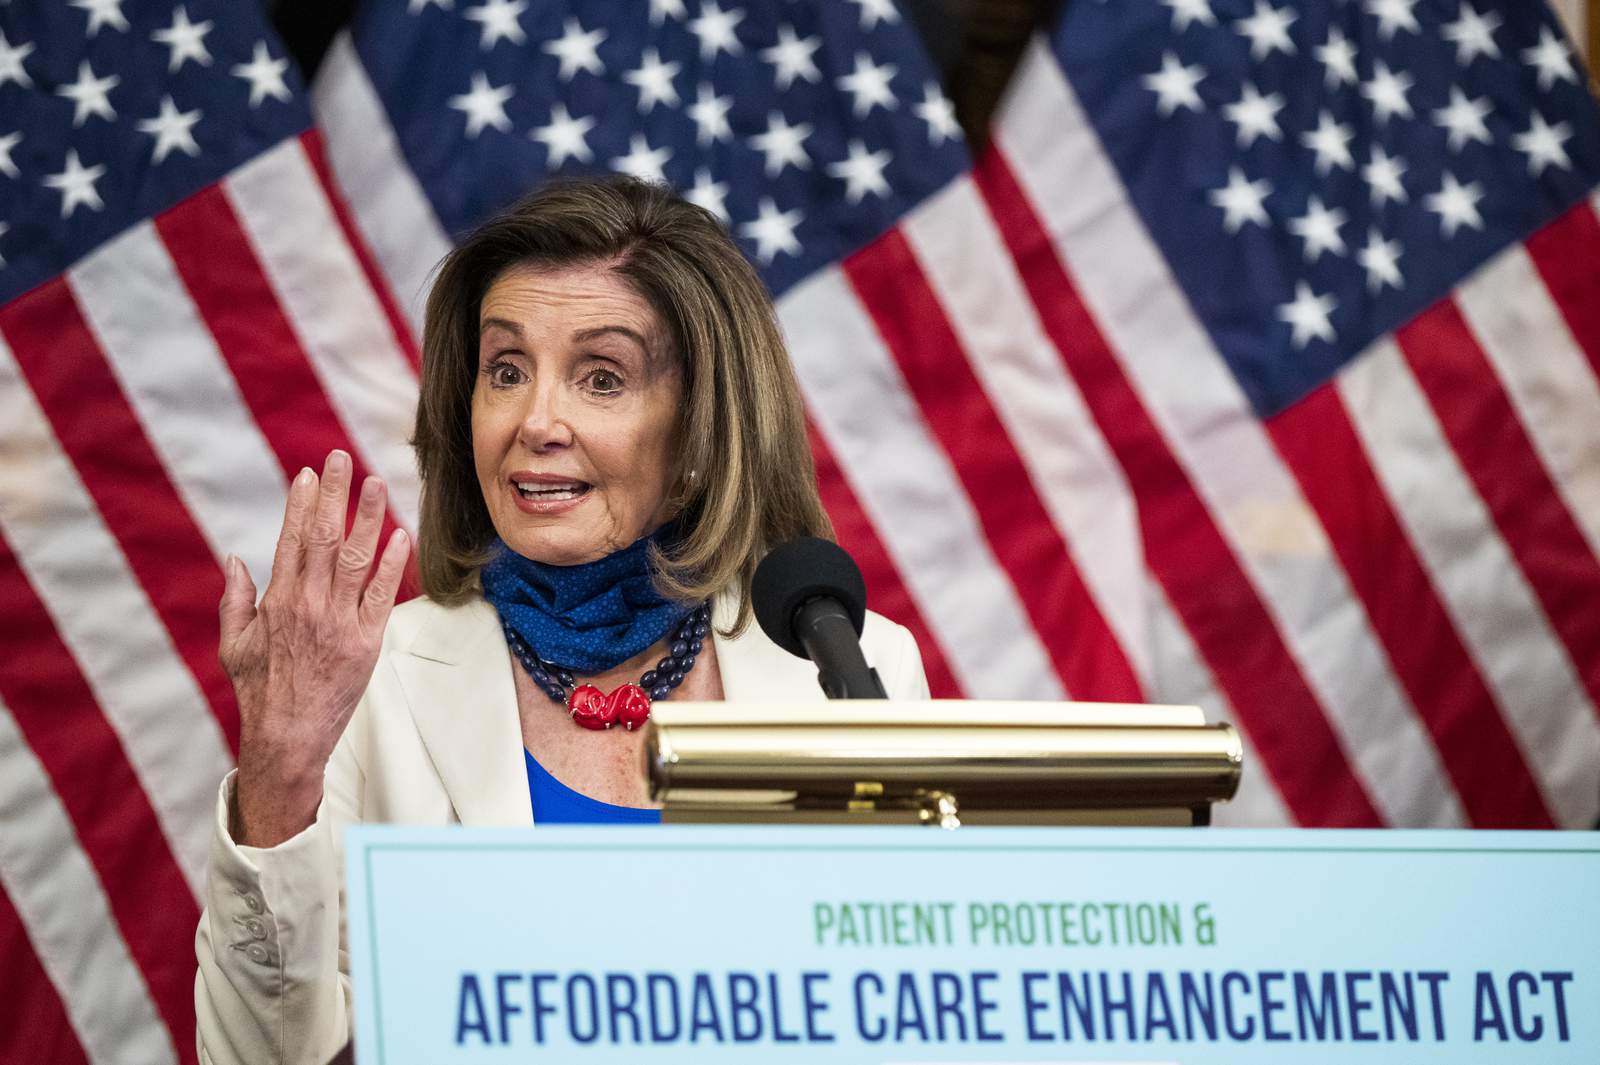 With a jab at Trump, Pelosi unveils new 'Obamacare' bill